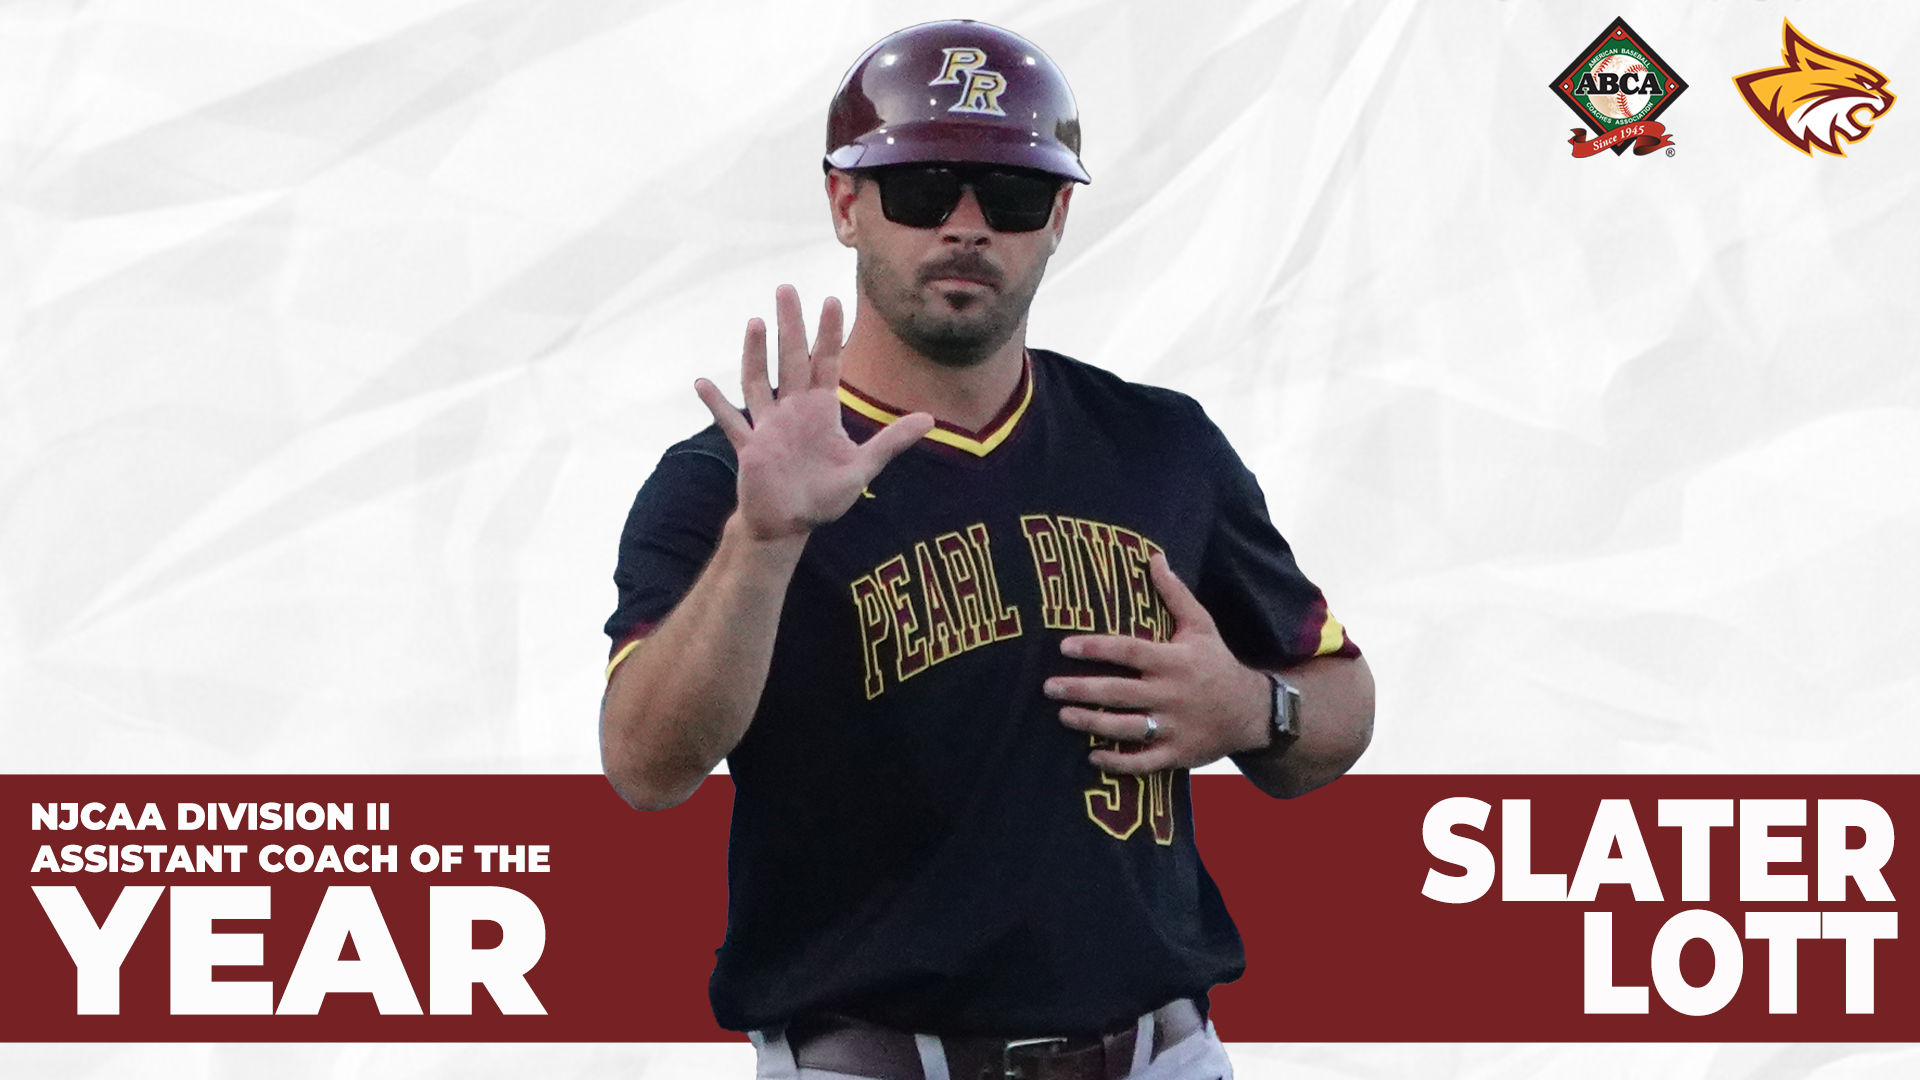 PRCC’s Slater Lott named ABCA Assistant Coach of the Year